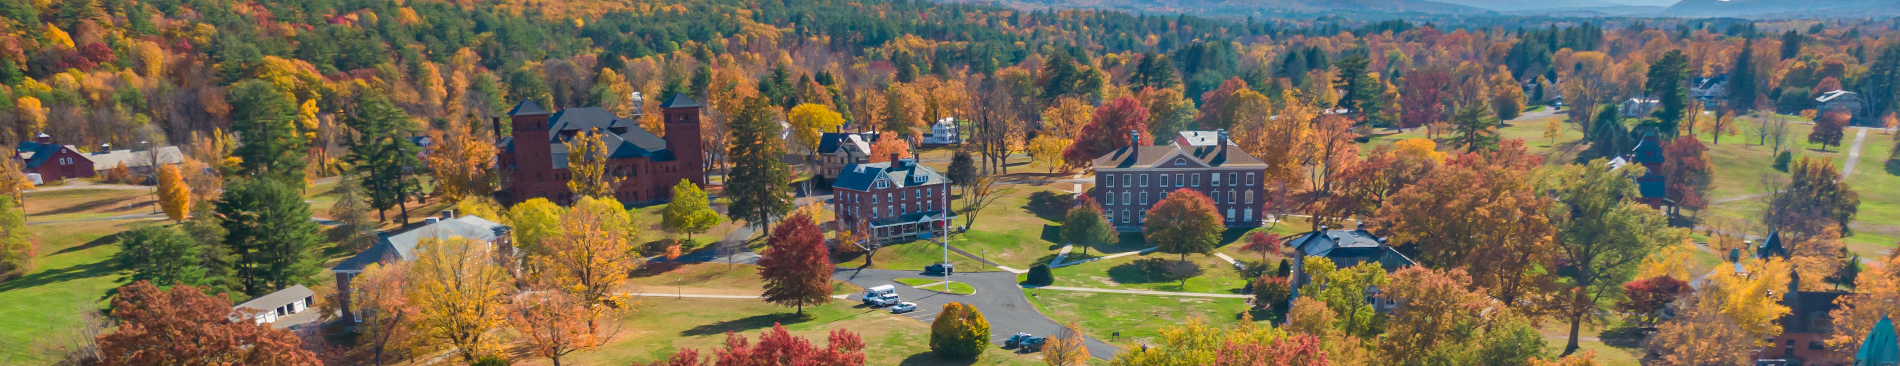 Aerial view of New England campus